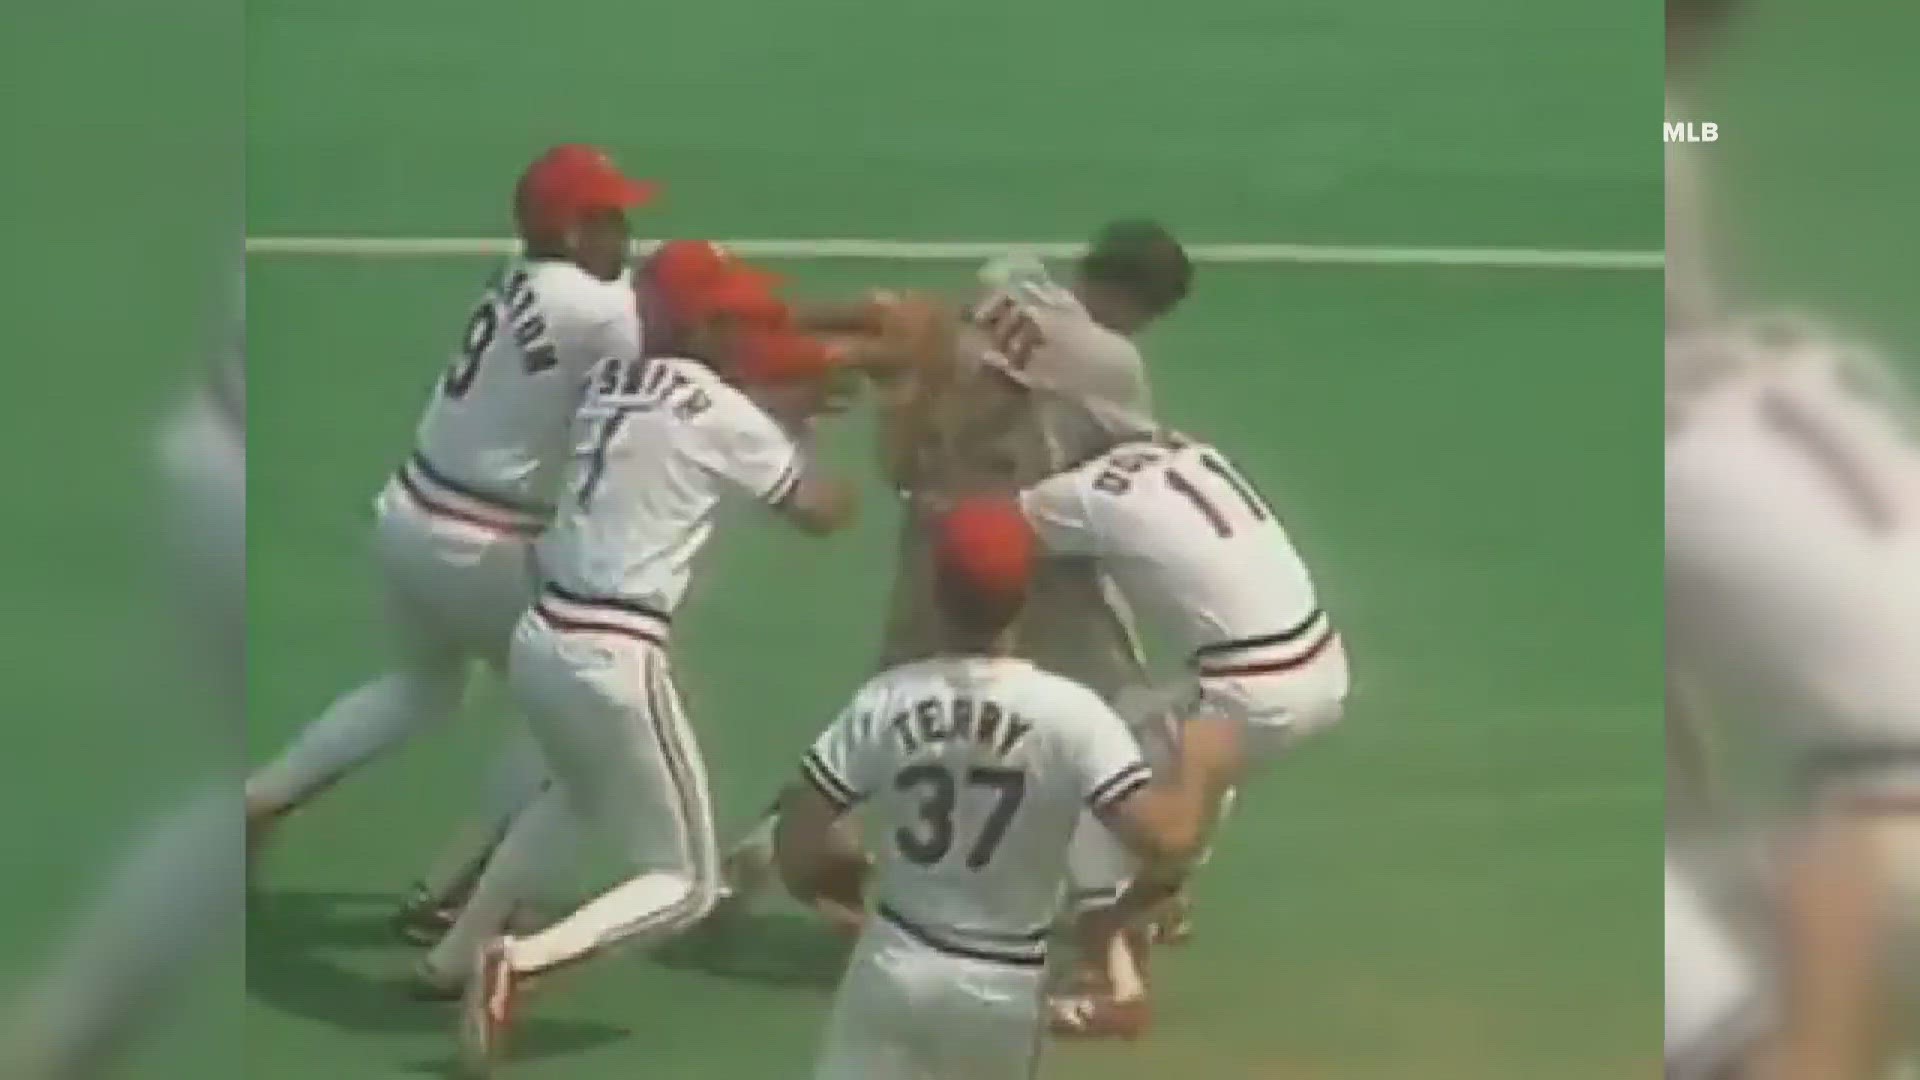 The Cardinals are not exempt from some scuffles in their history. We look back on some of the most notable brawls.